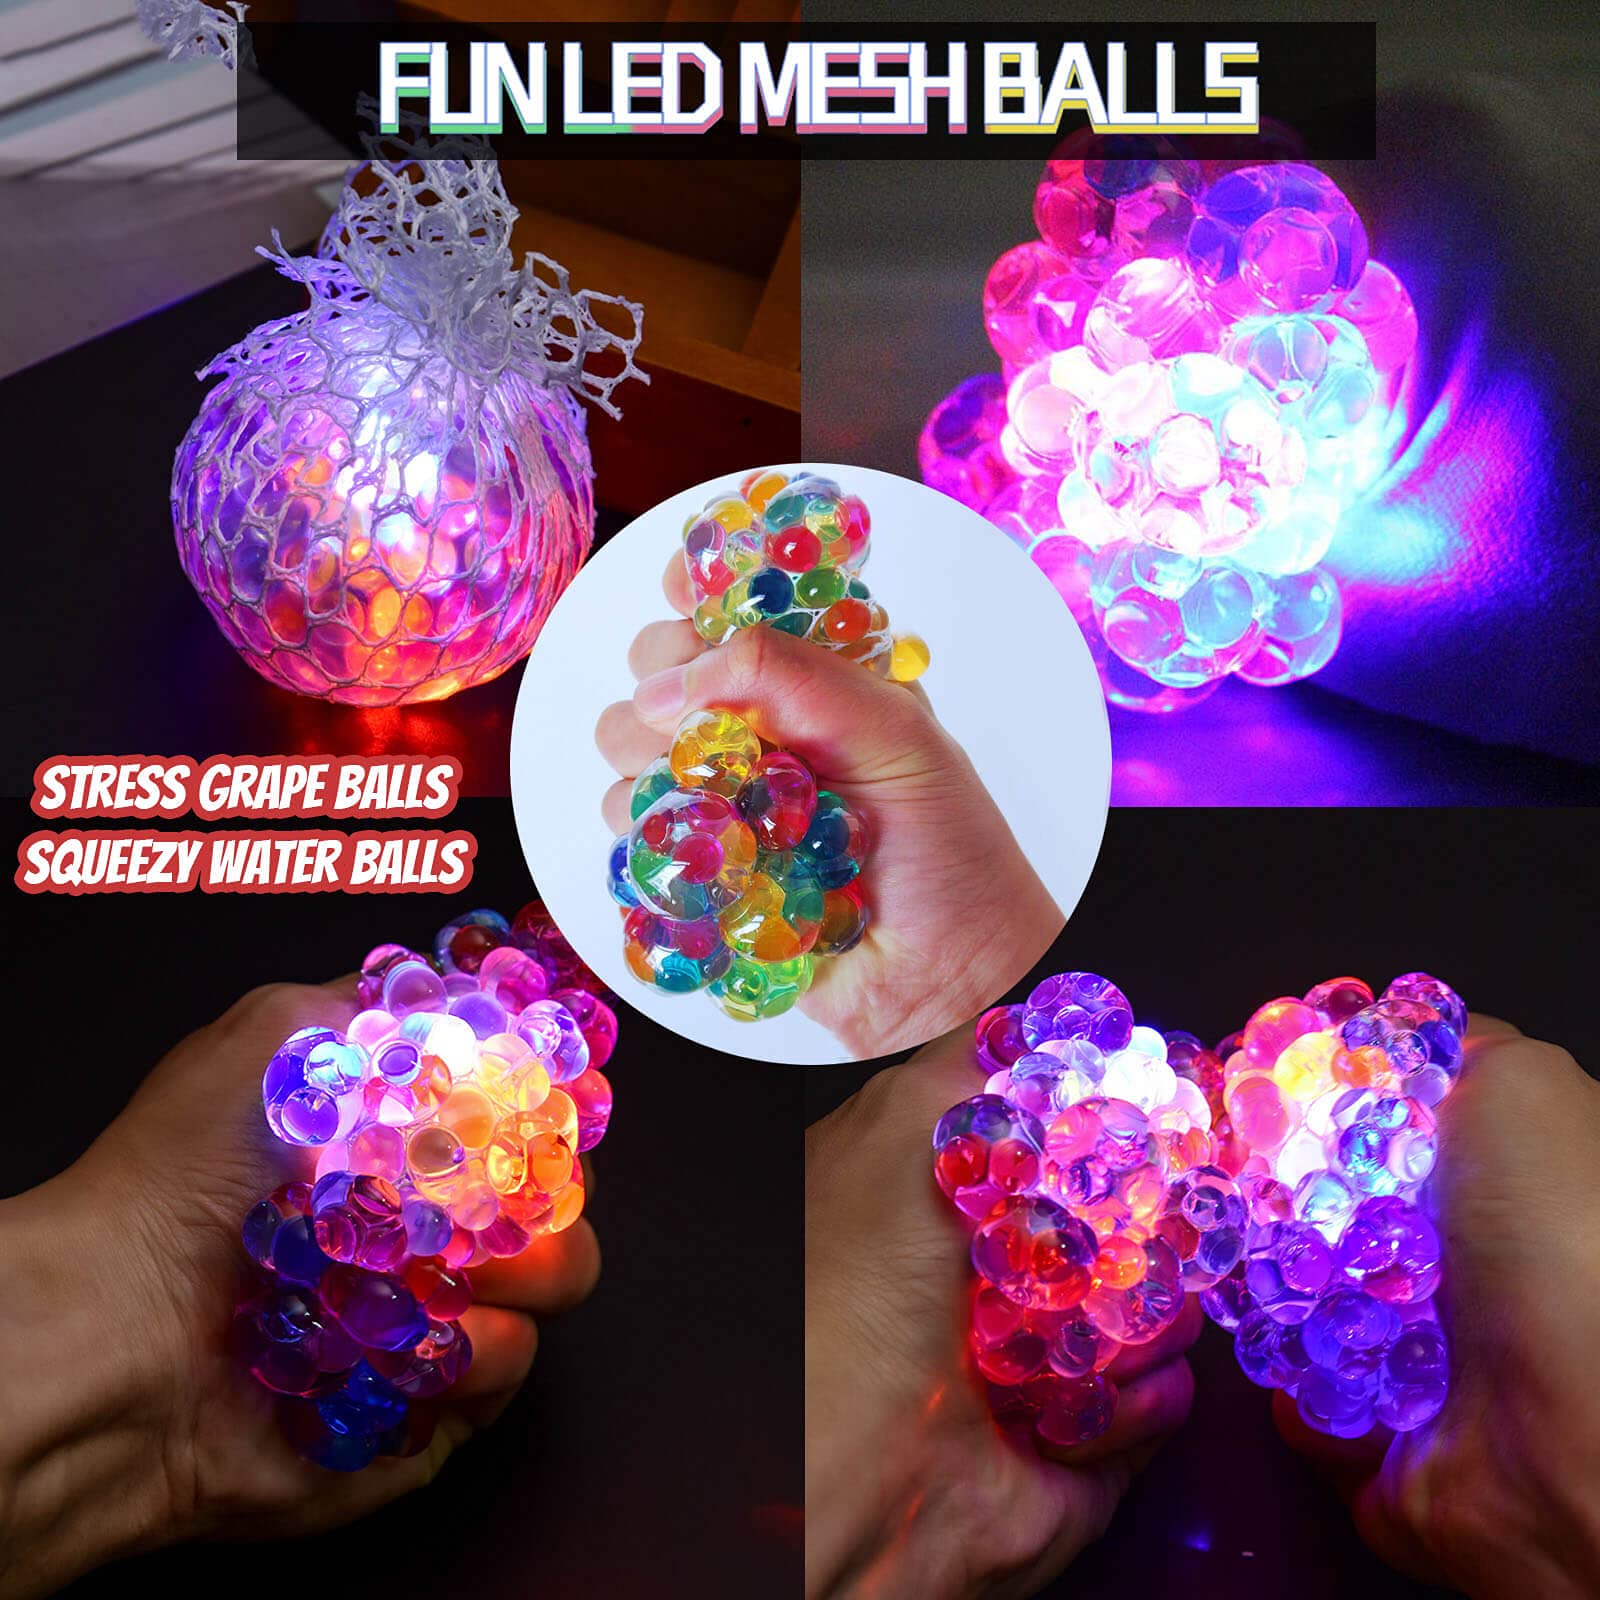 HIETIRA Squishy Stress Balls for Kids and Adults - 6 Balls Water Bead Stress Balls Needohball DNA Balls Sensory Ball Squeeze Ball Fidget Toys Set for Anxiety Autism ADHD and More